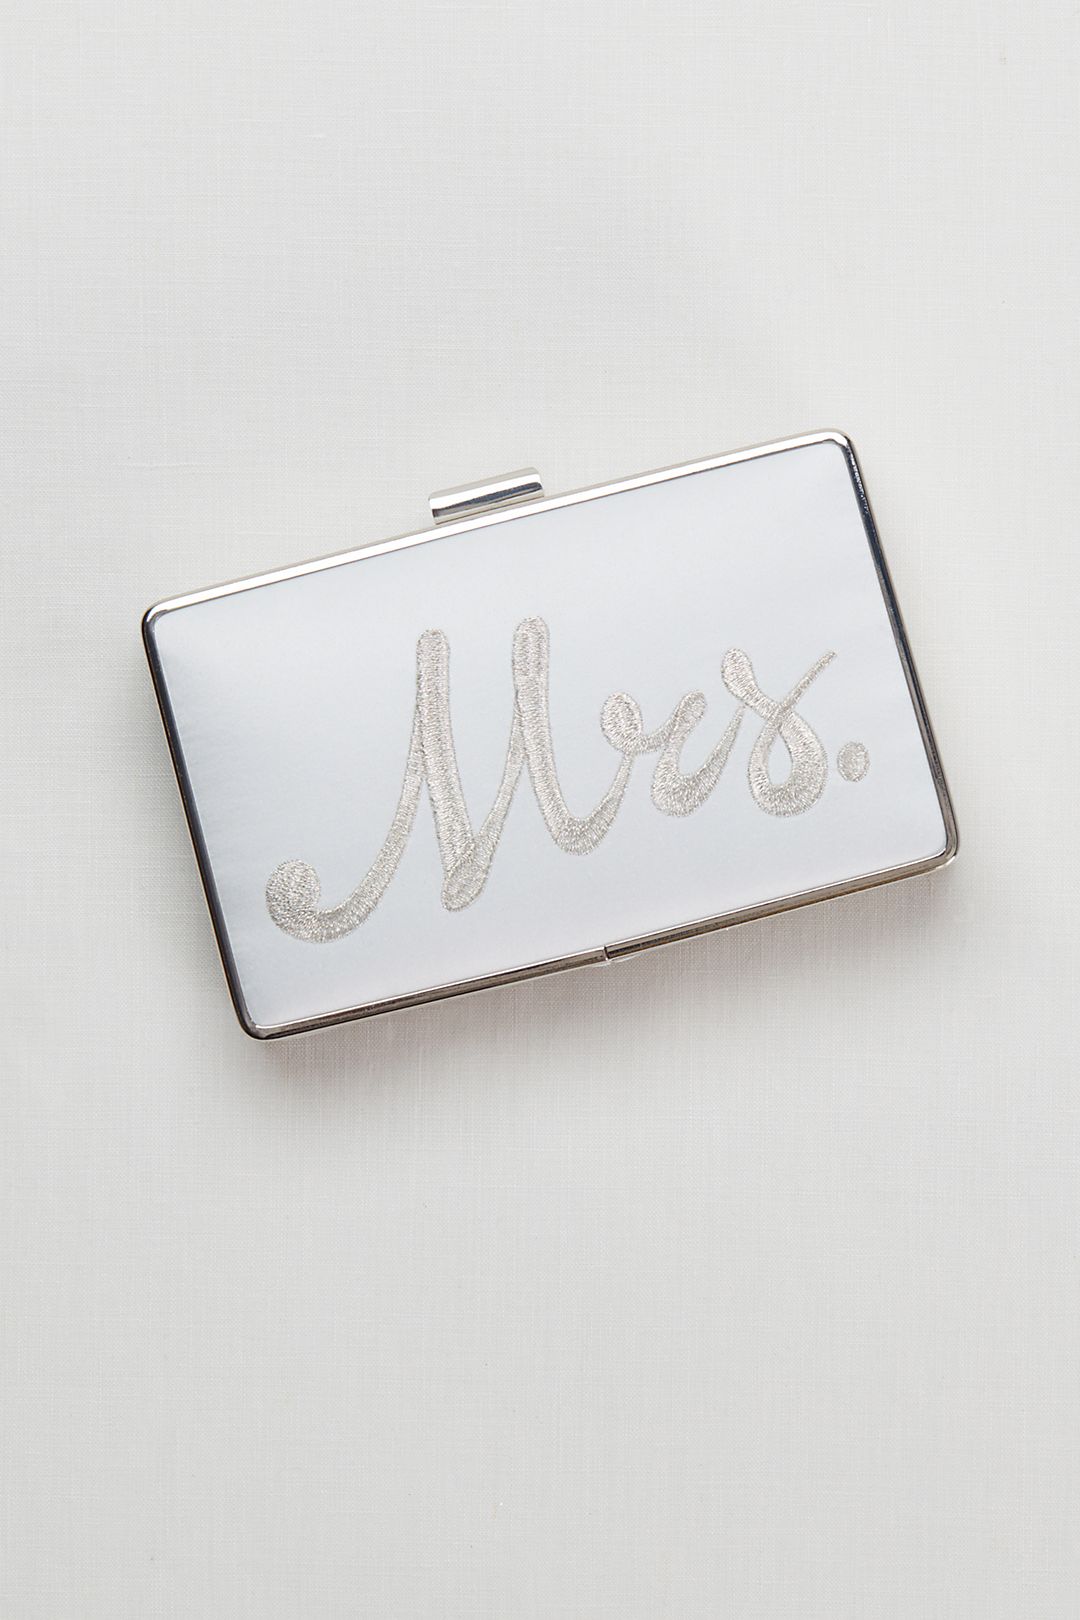 Mrs Embroidered Minaudiere Image 1